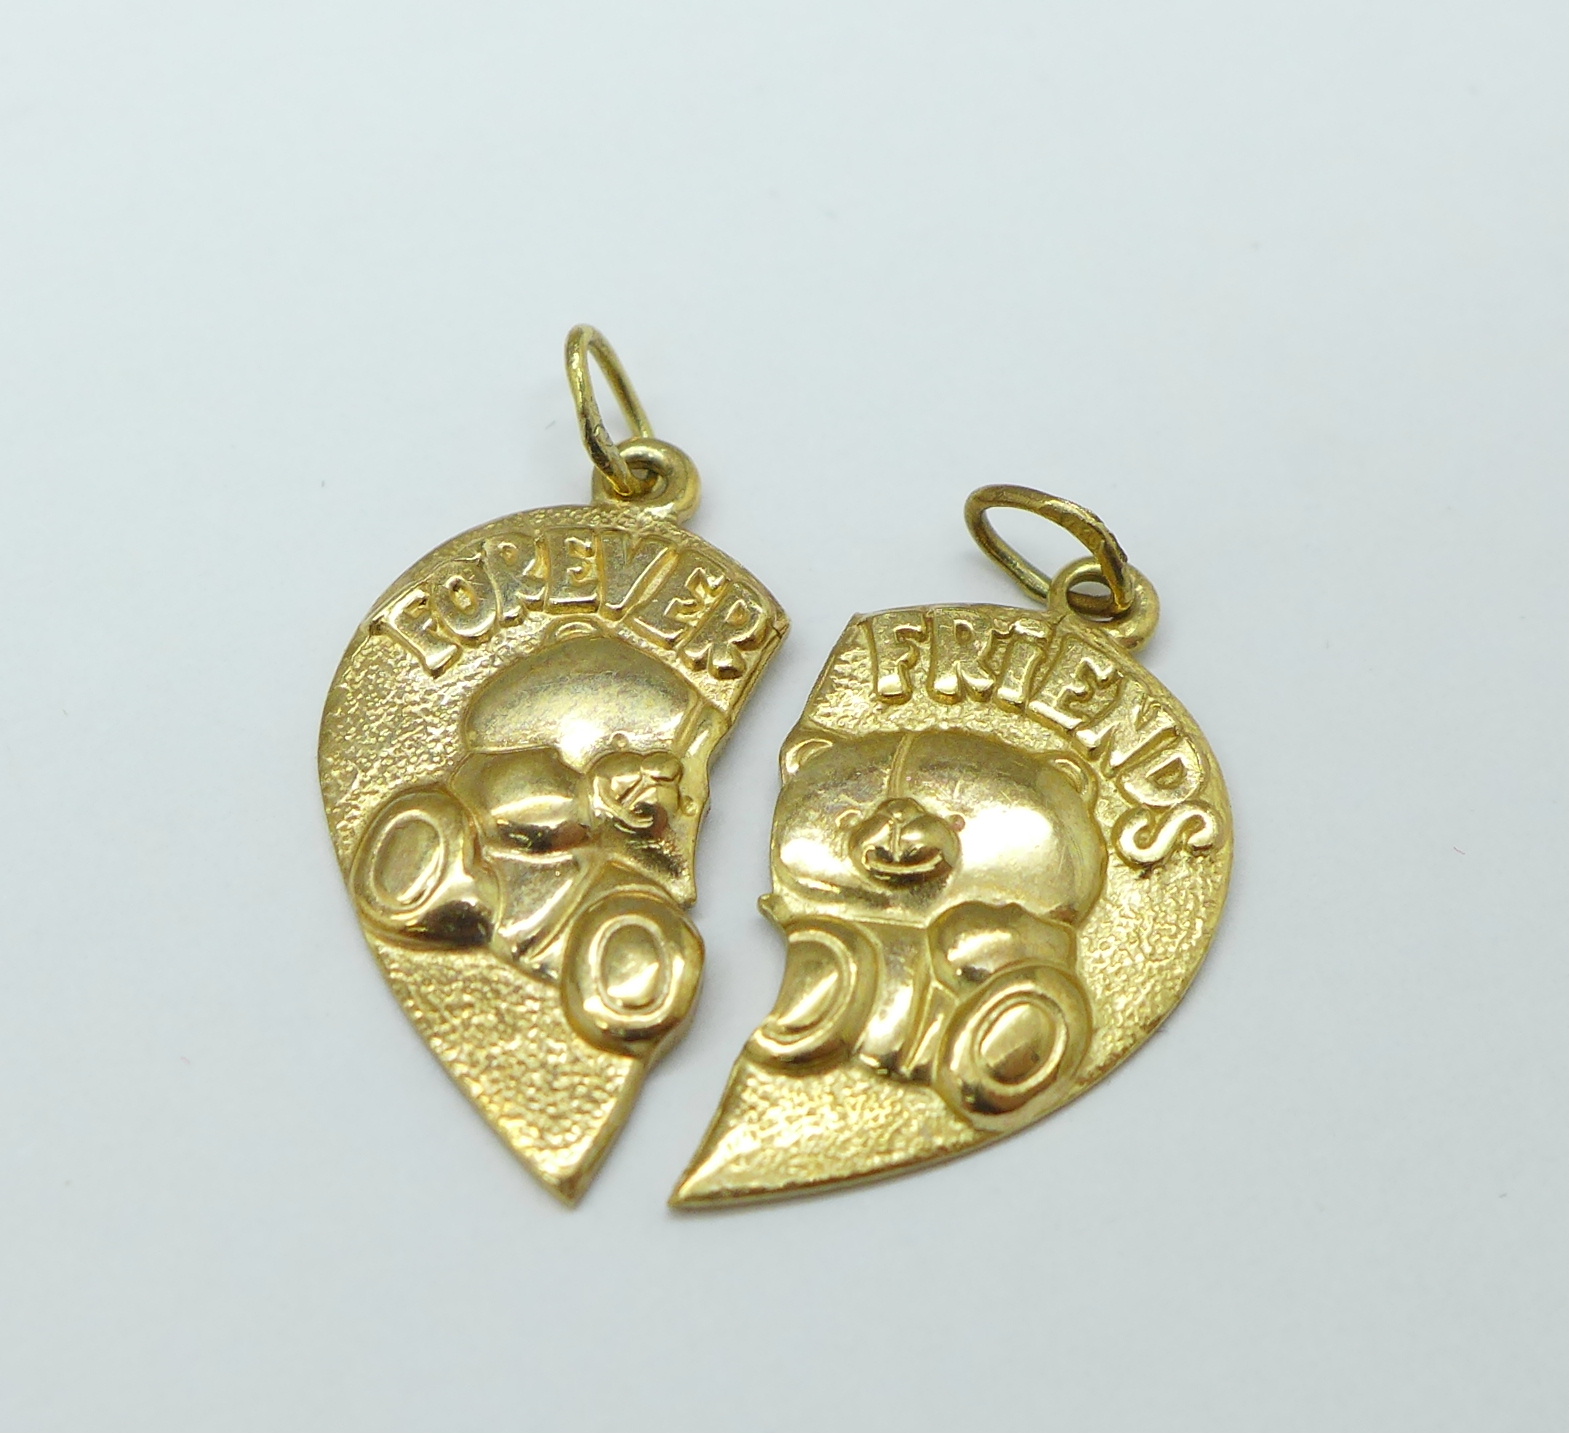 A large collection of 9ct gold and yellow metal jewellery, single earrings, chains, etc., a/f, 21.3g - Image 5 of 5